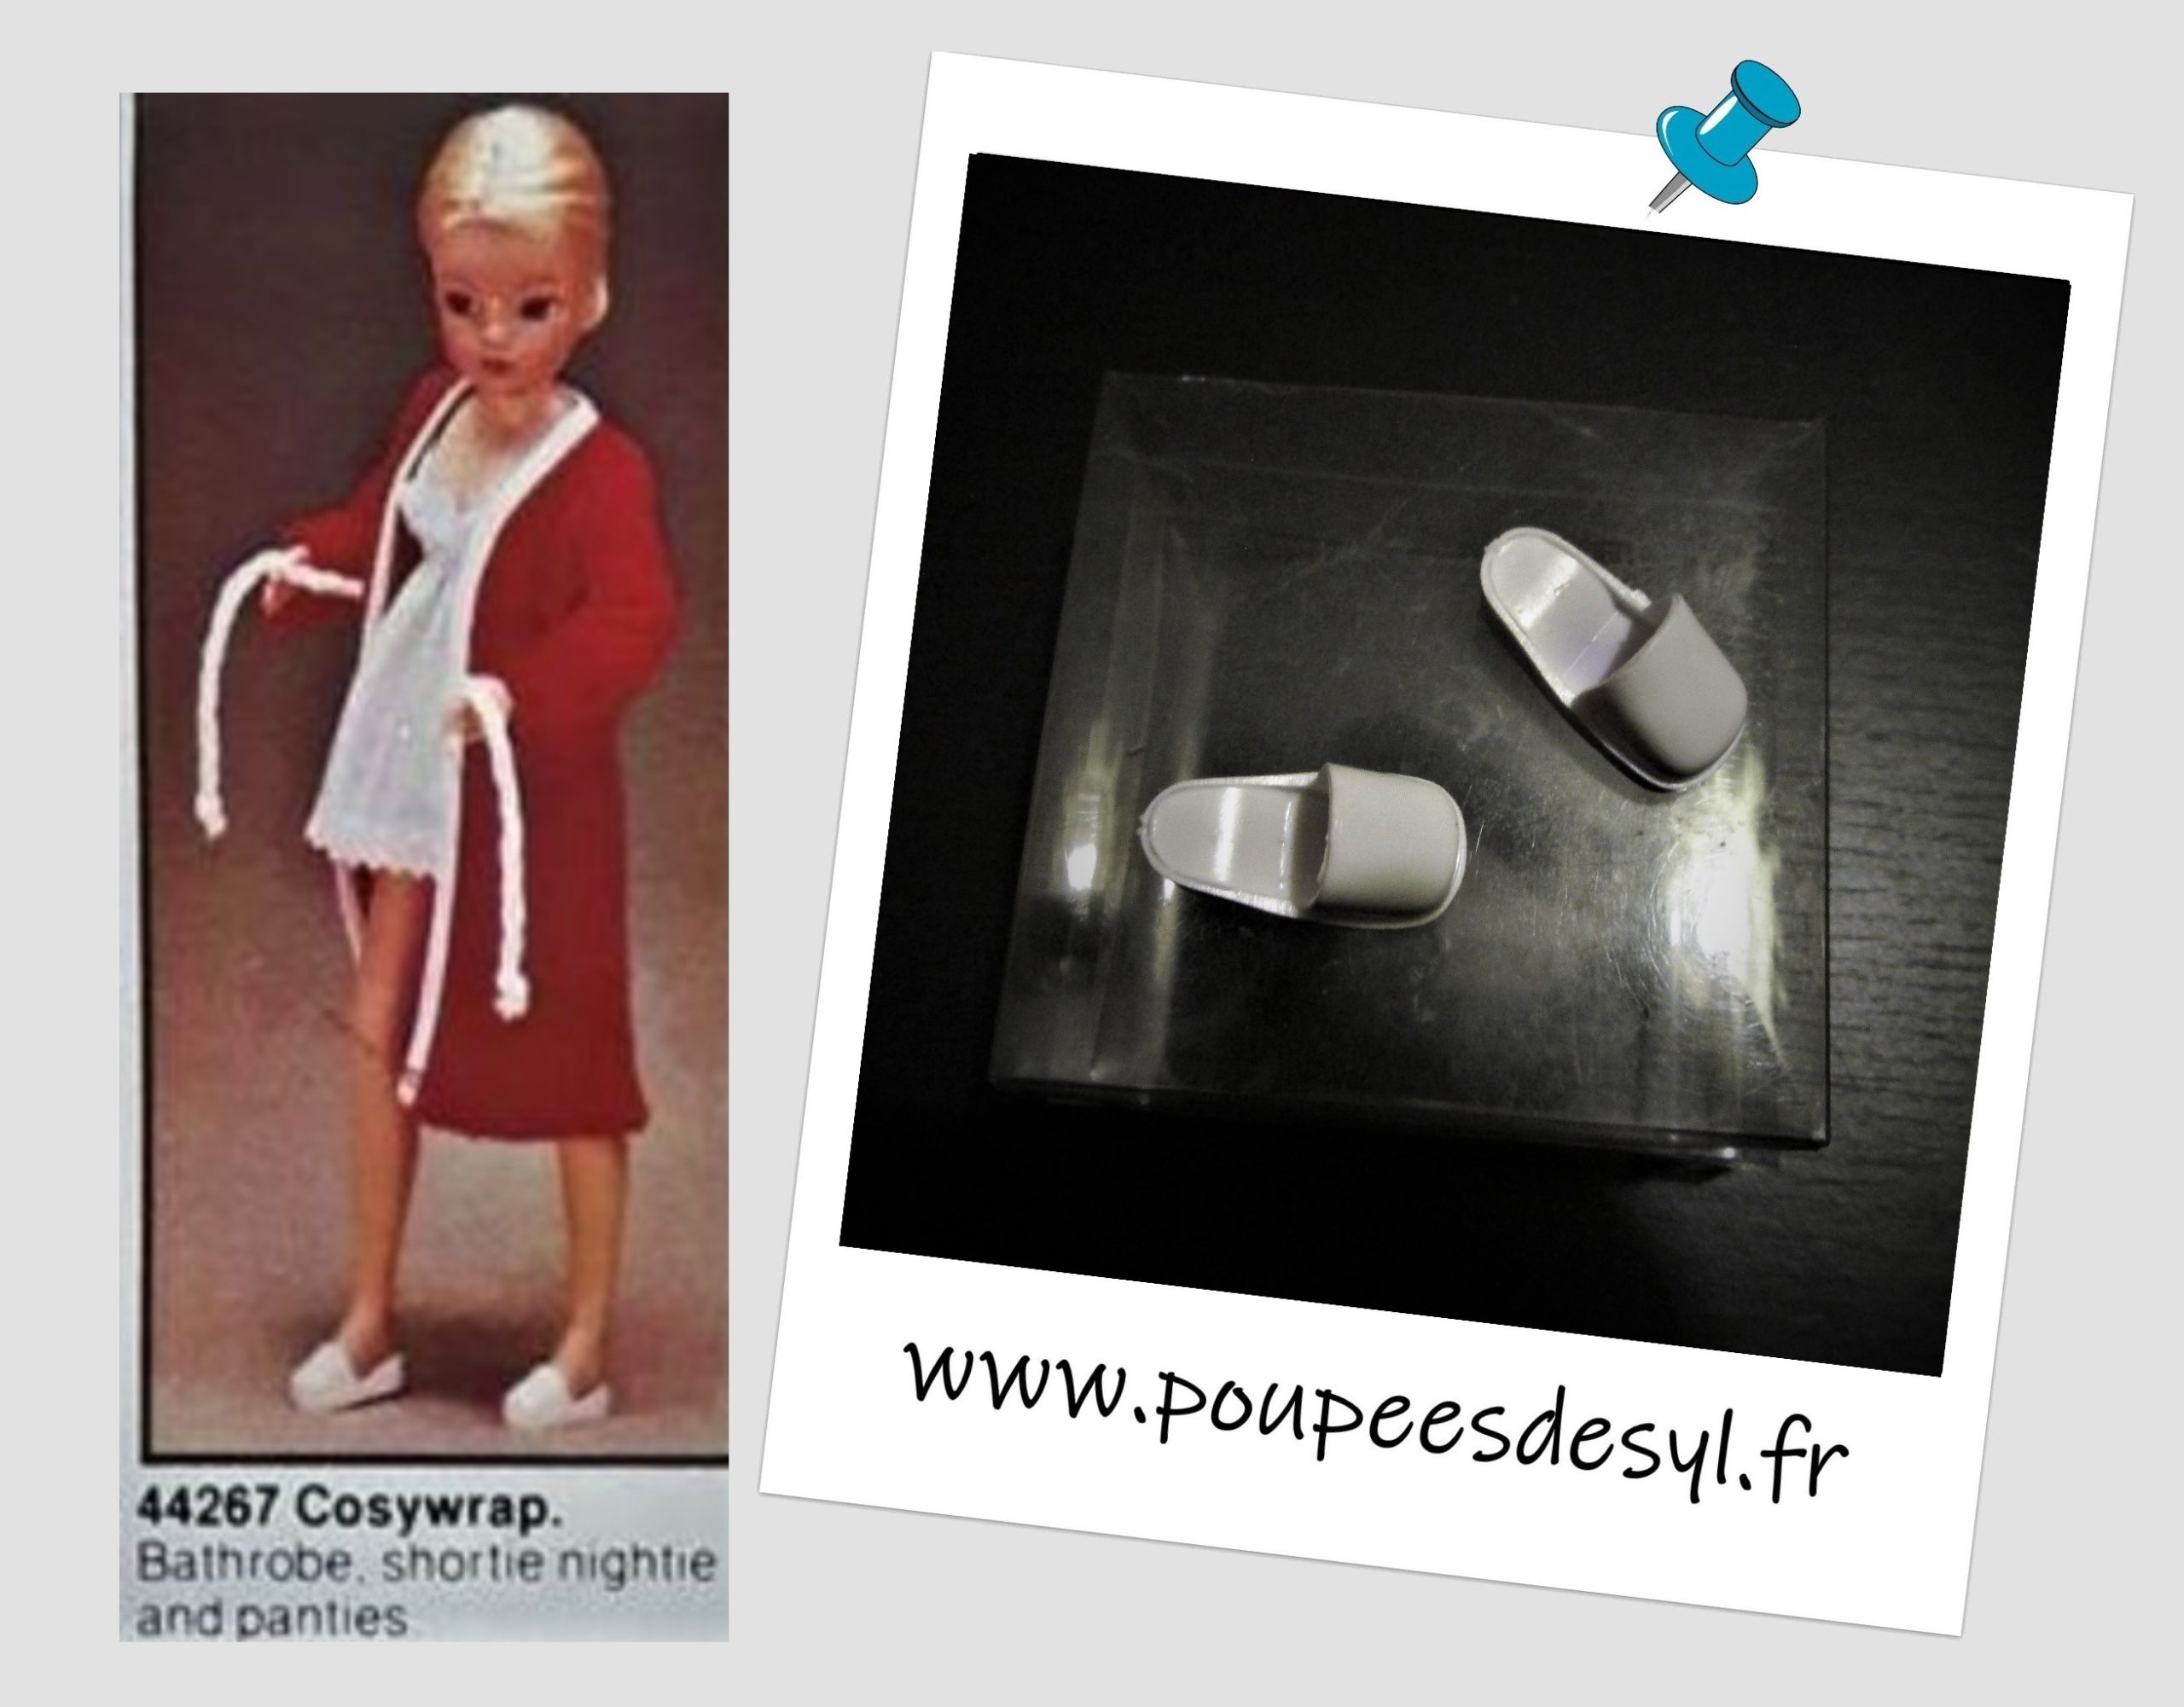 SINDY PEDIGREE – Chaussures mules blanches – COSYWRAP – #44267 – 1978